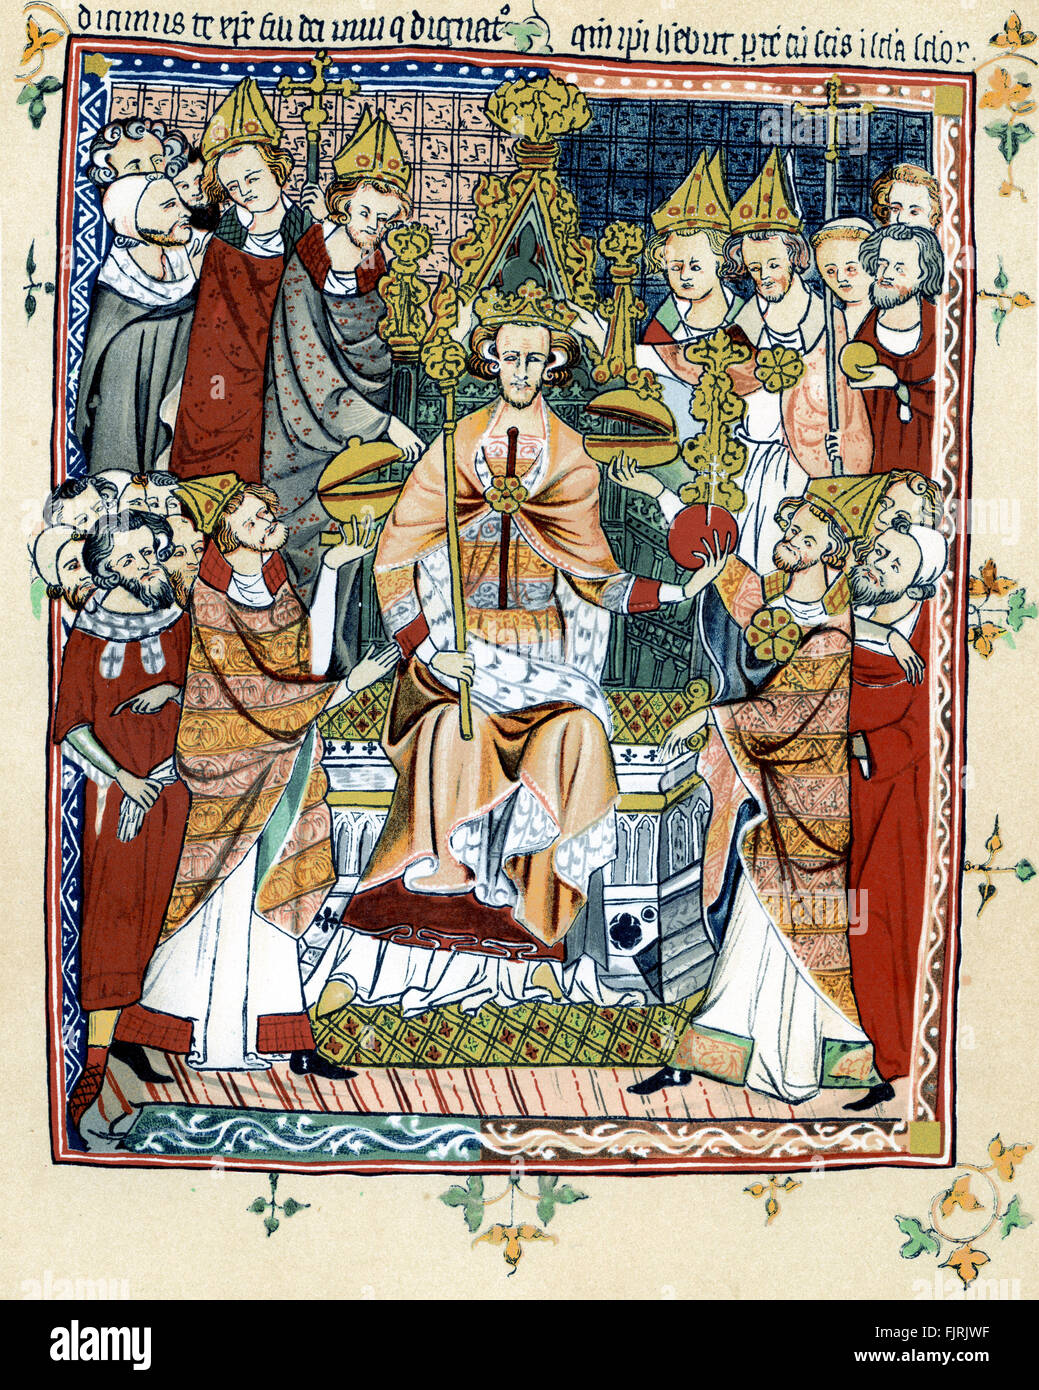 Coronation of a medieval king of England, early 14th century (possible Edward  III - but not confirmed) (From a manuscript in the collection of Corpus Christ College, Cambridge) Stock Photo